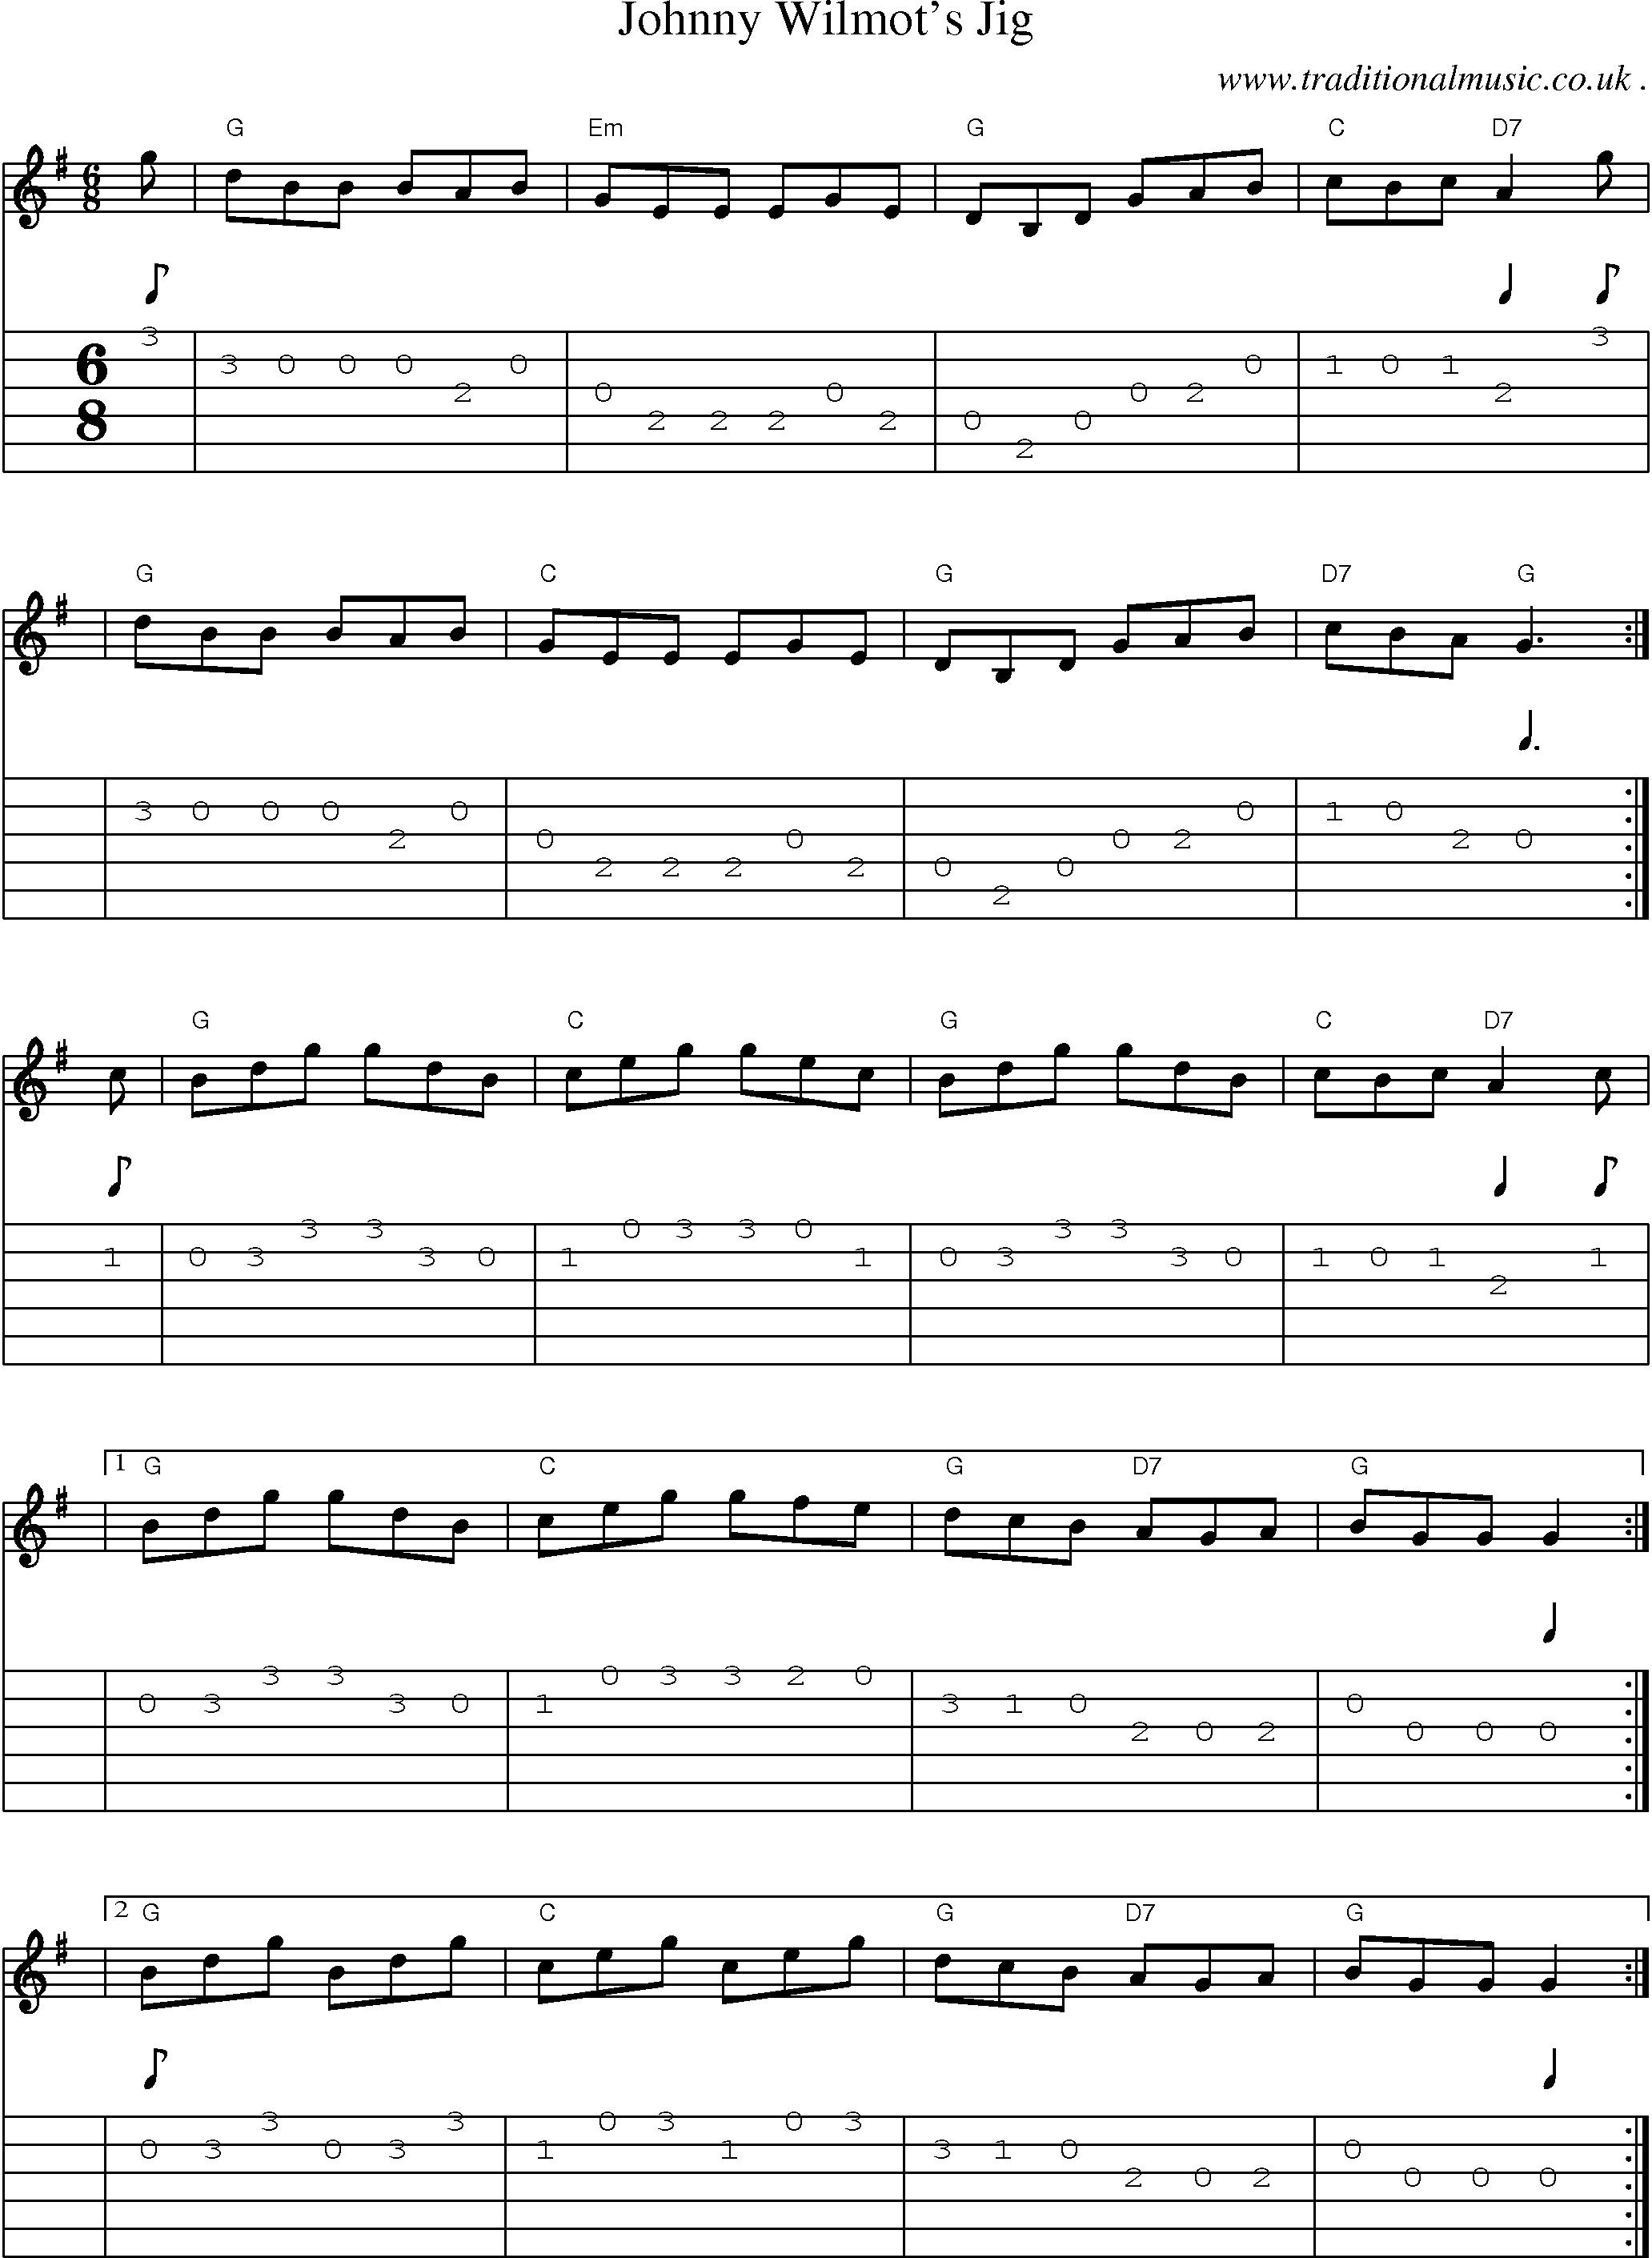 Sheet-music  score, Chords and Guitar Tabs for Johnny Wilmots Jig